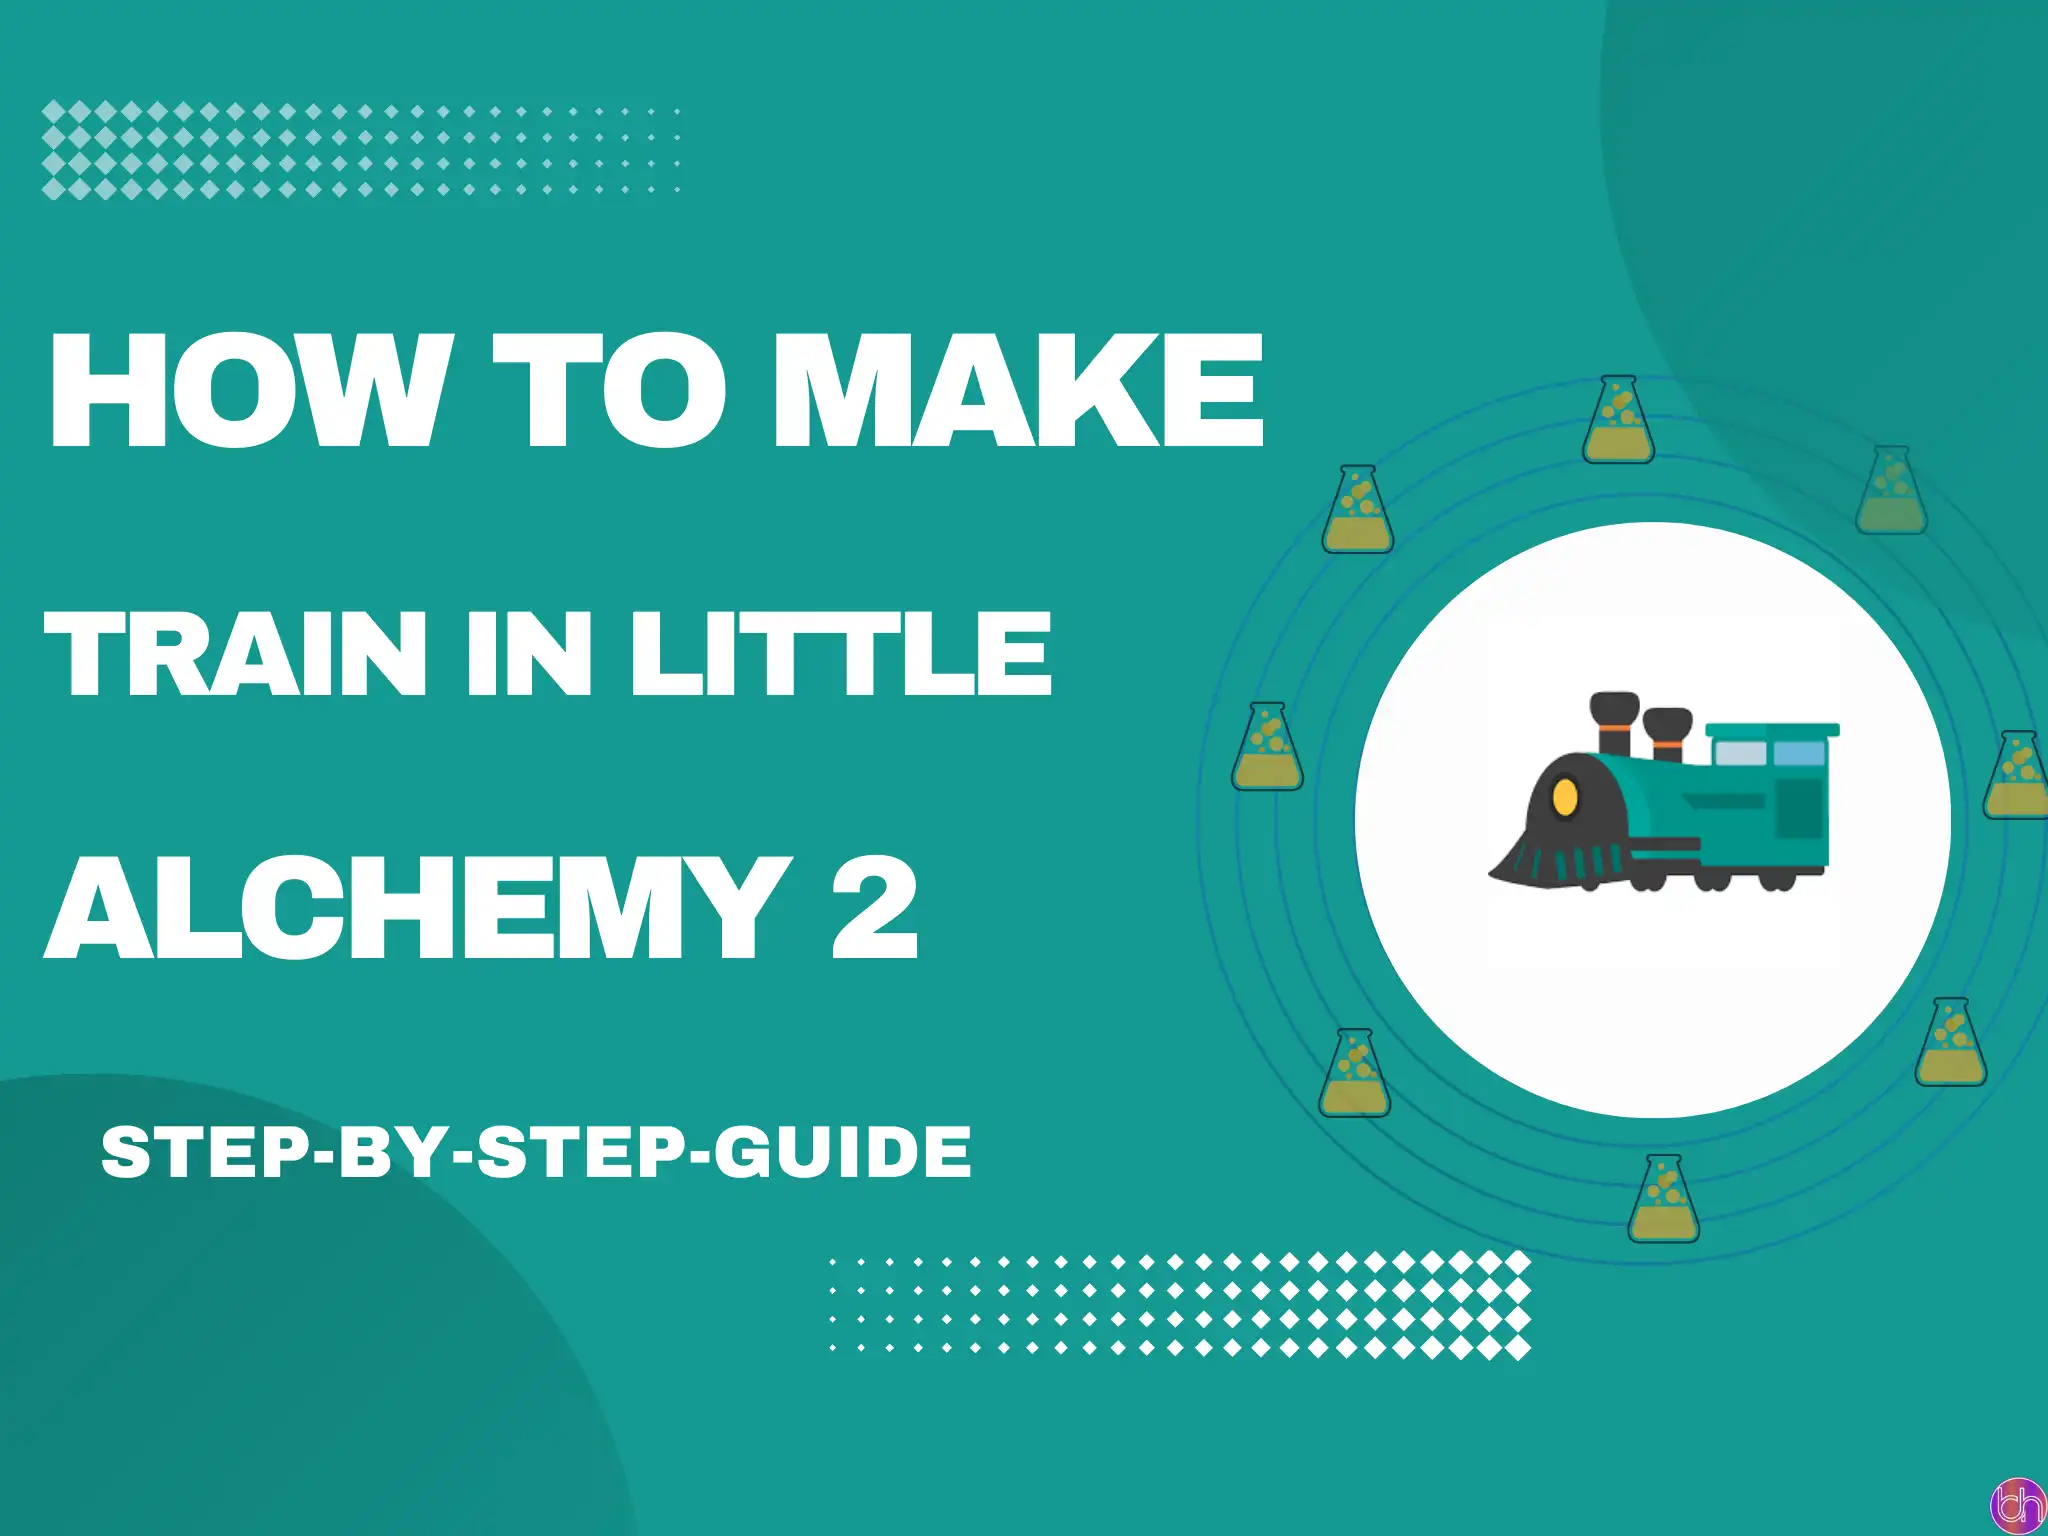 How to make Train in Little Alchemy 2